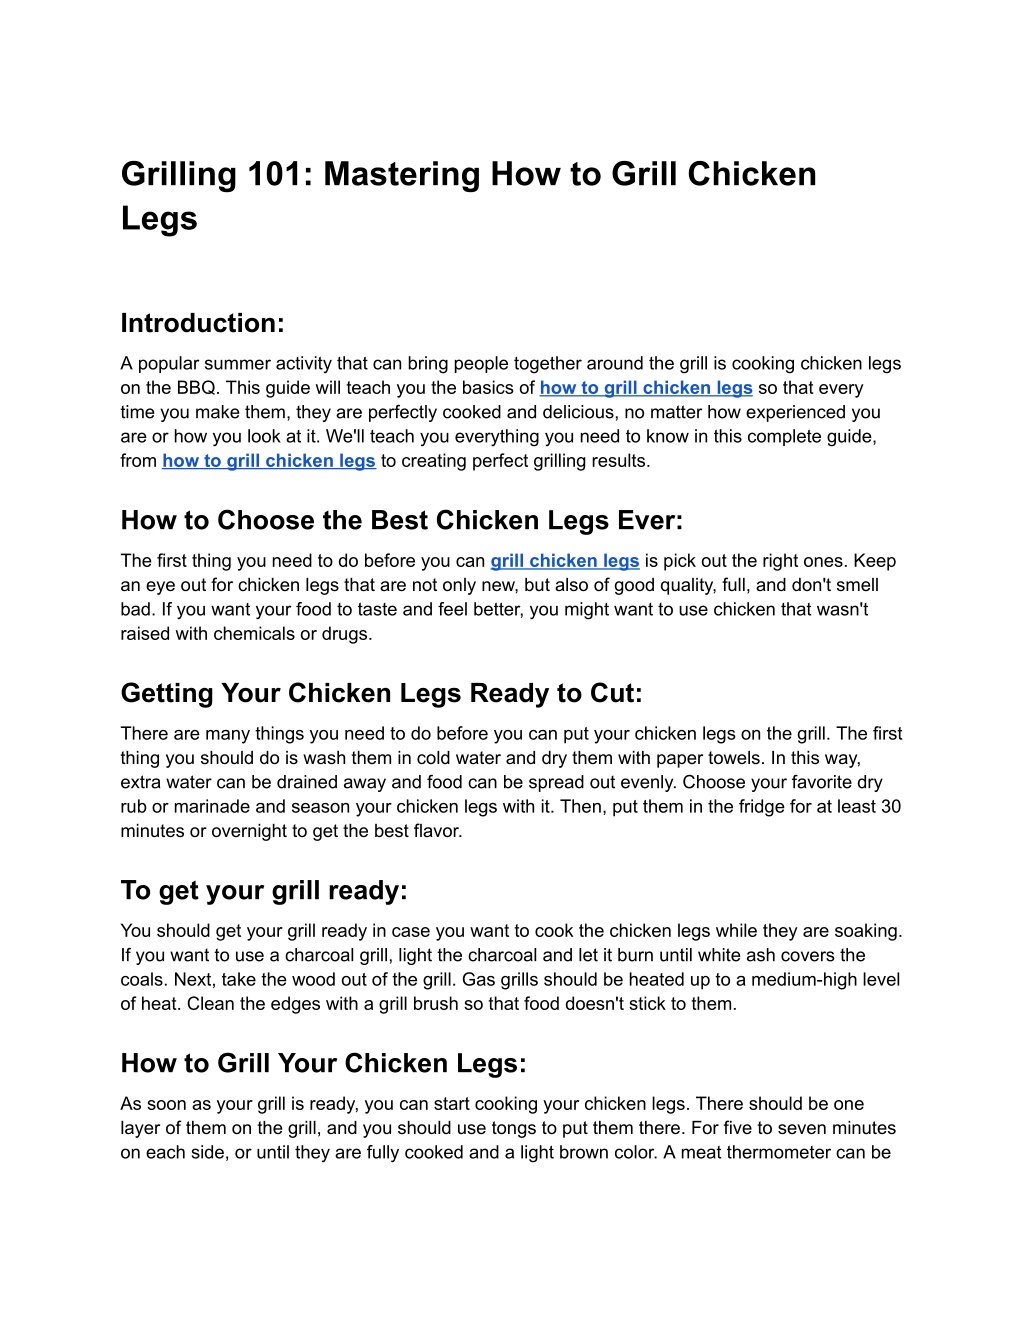 PPT - Grilling 101_ Mastering How to Grill Chicken Legs - Google Docs ...